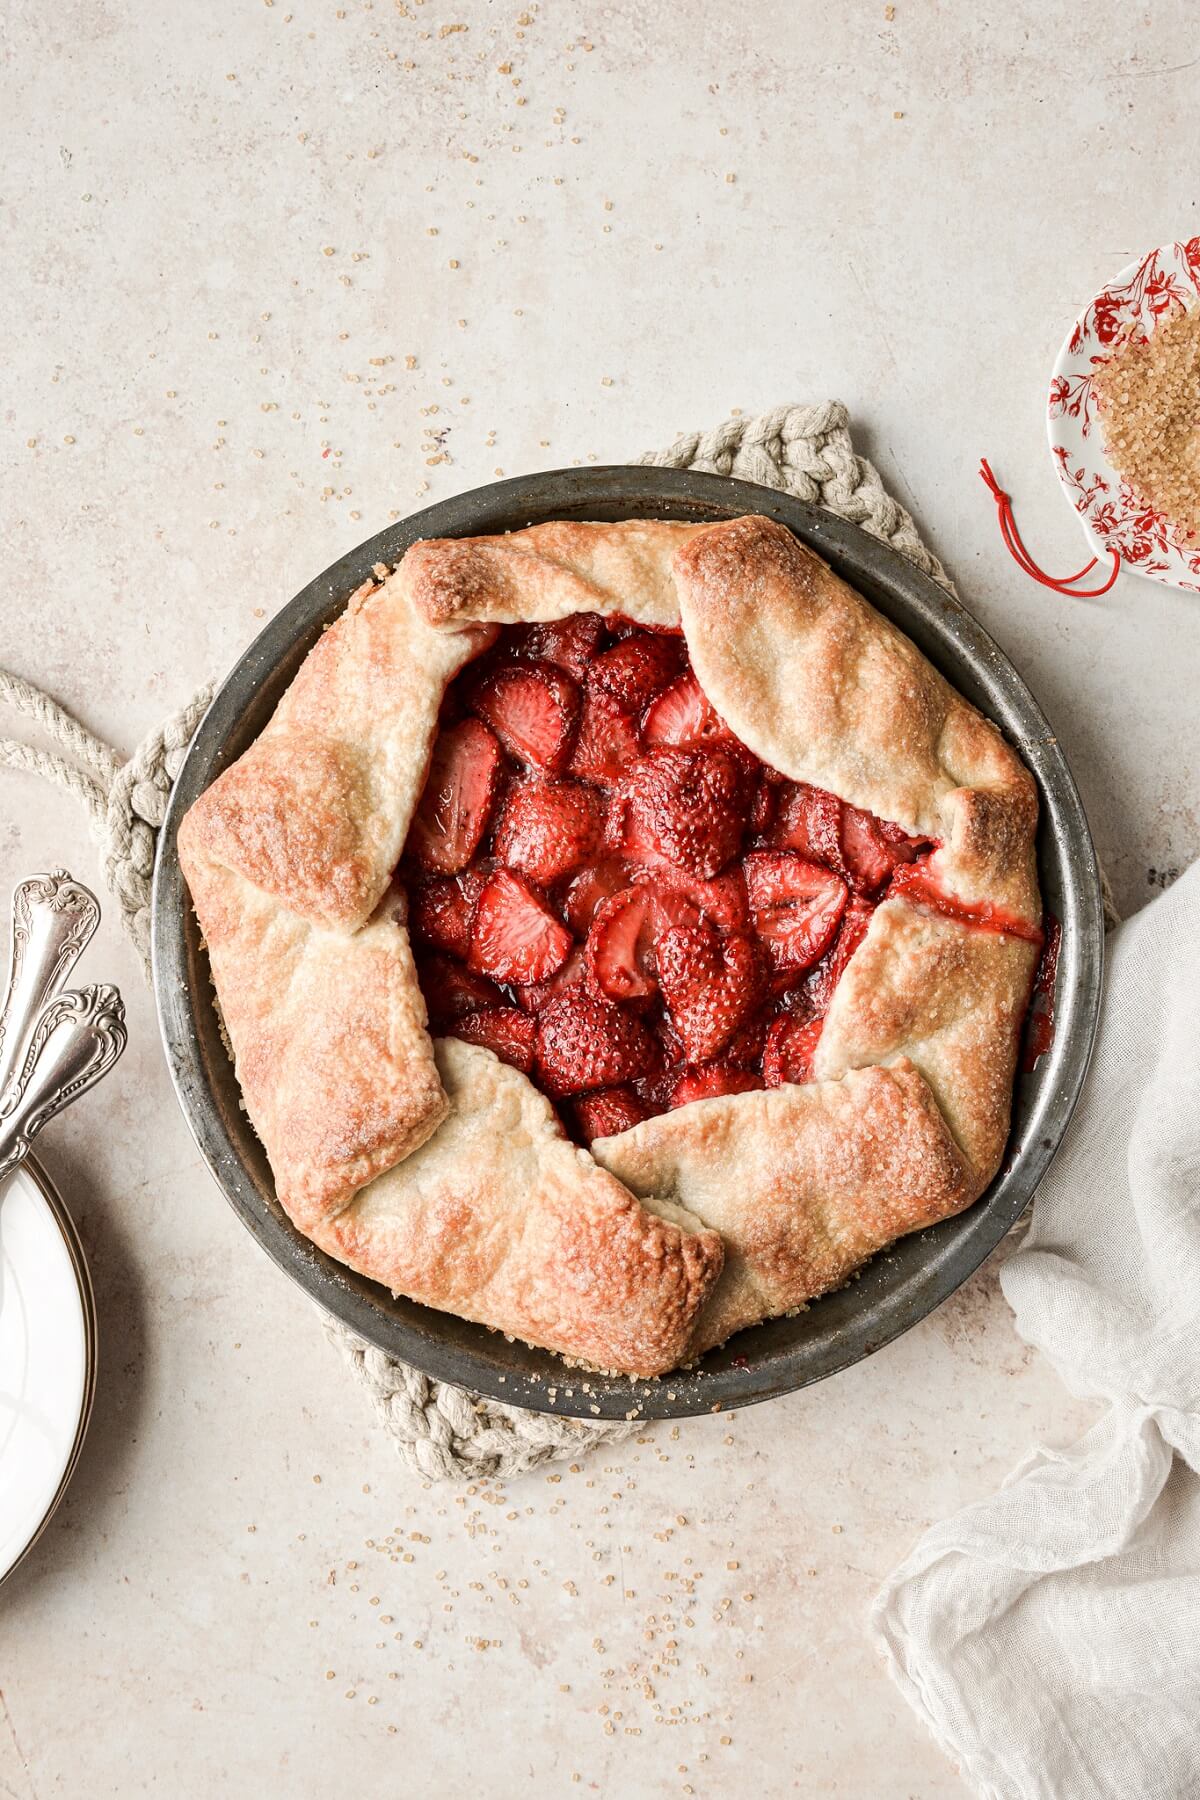 Strawberry galette sprinkled with sugar.